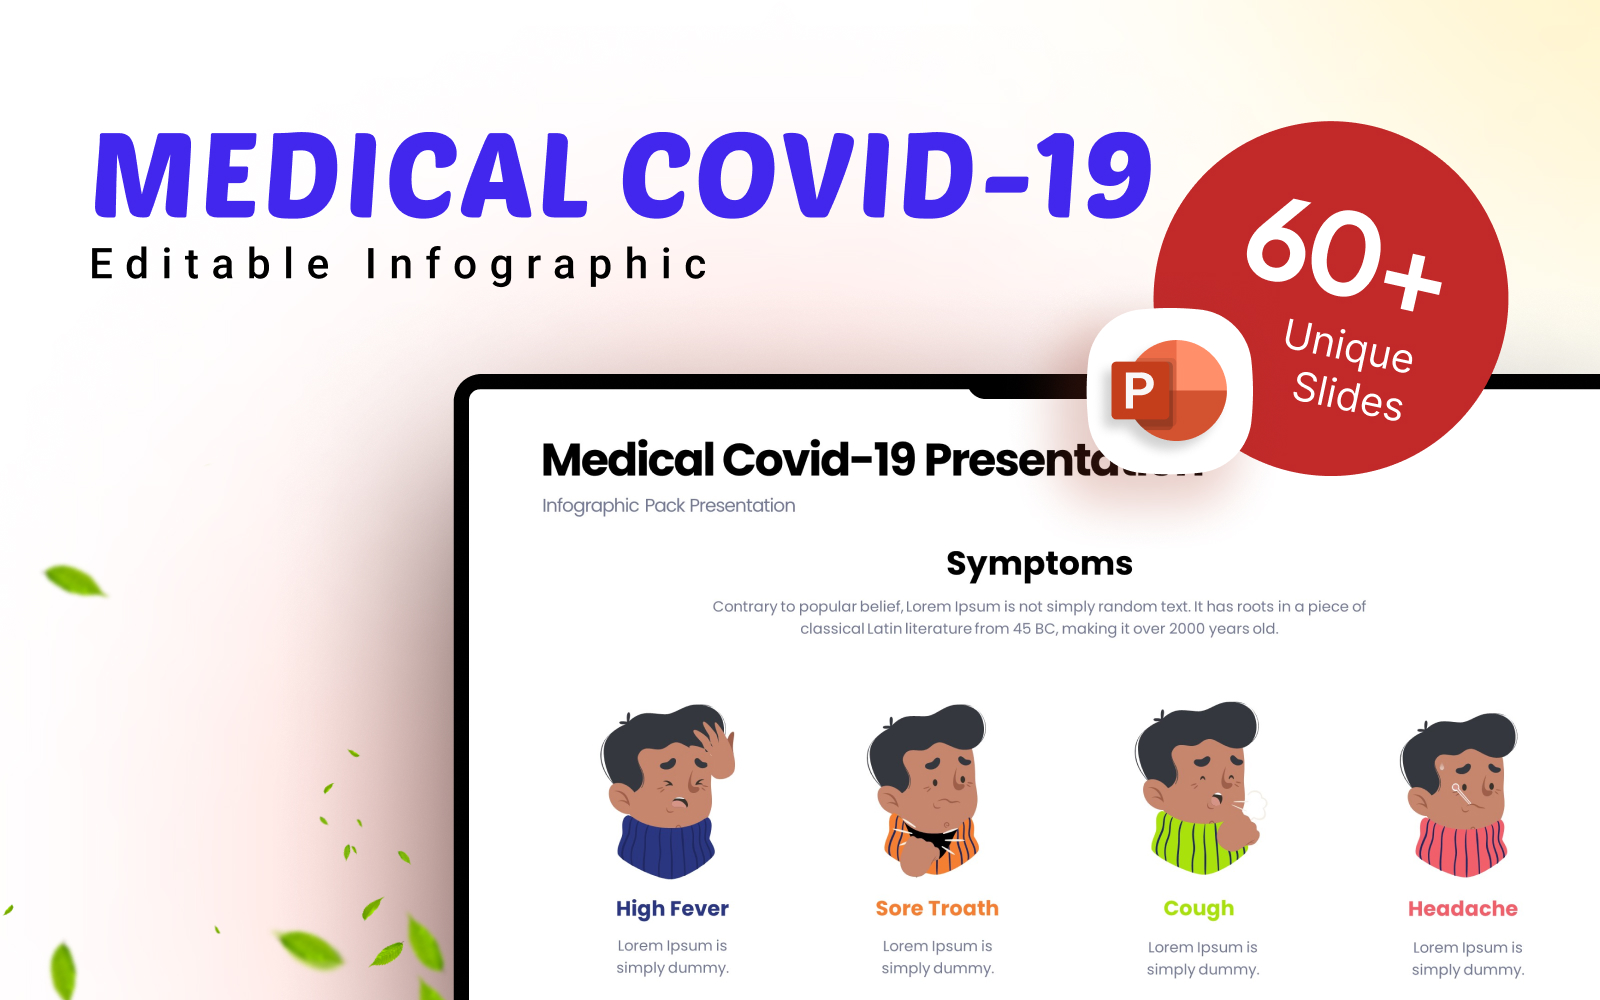 Medical Covid-19 Infographic Presentation Template